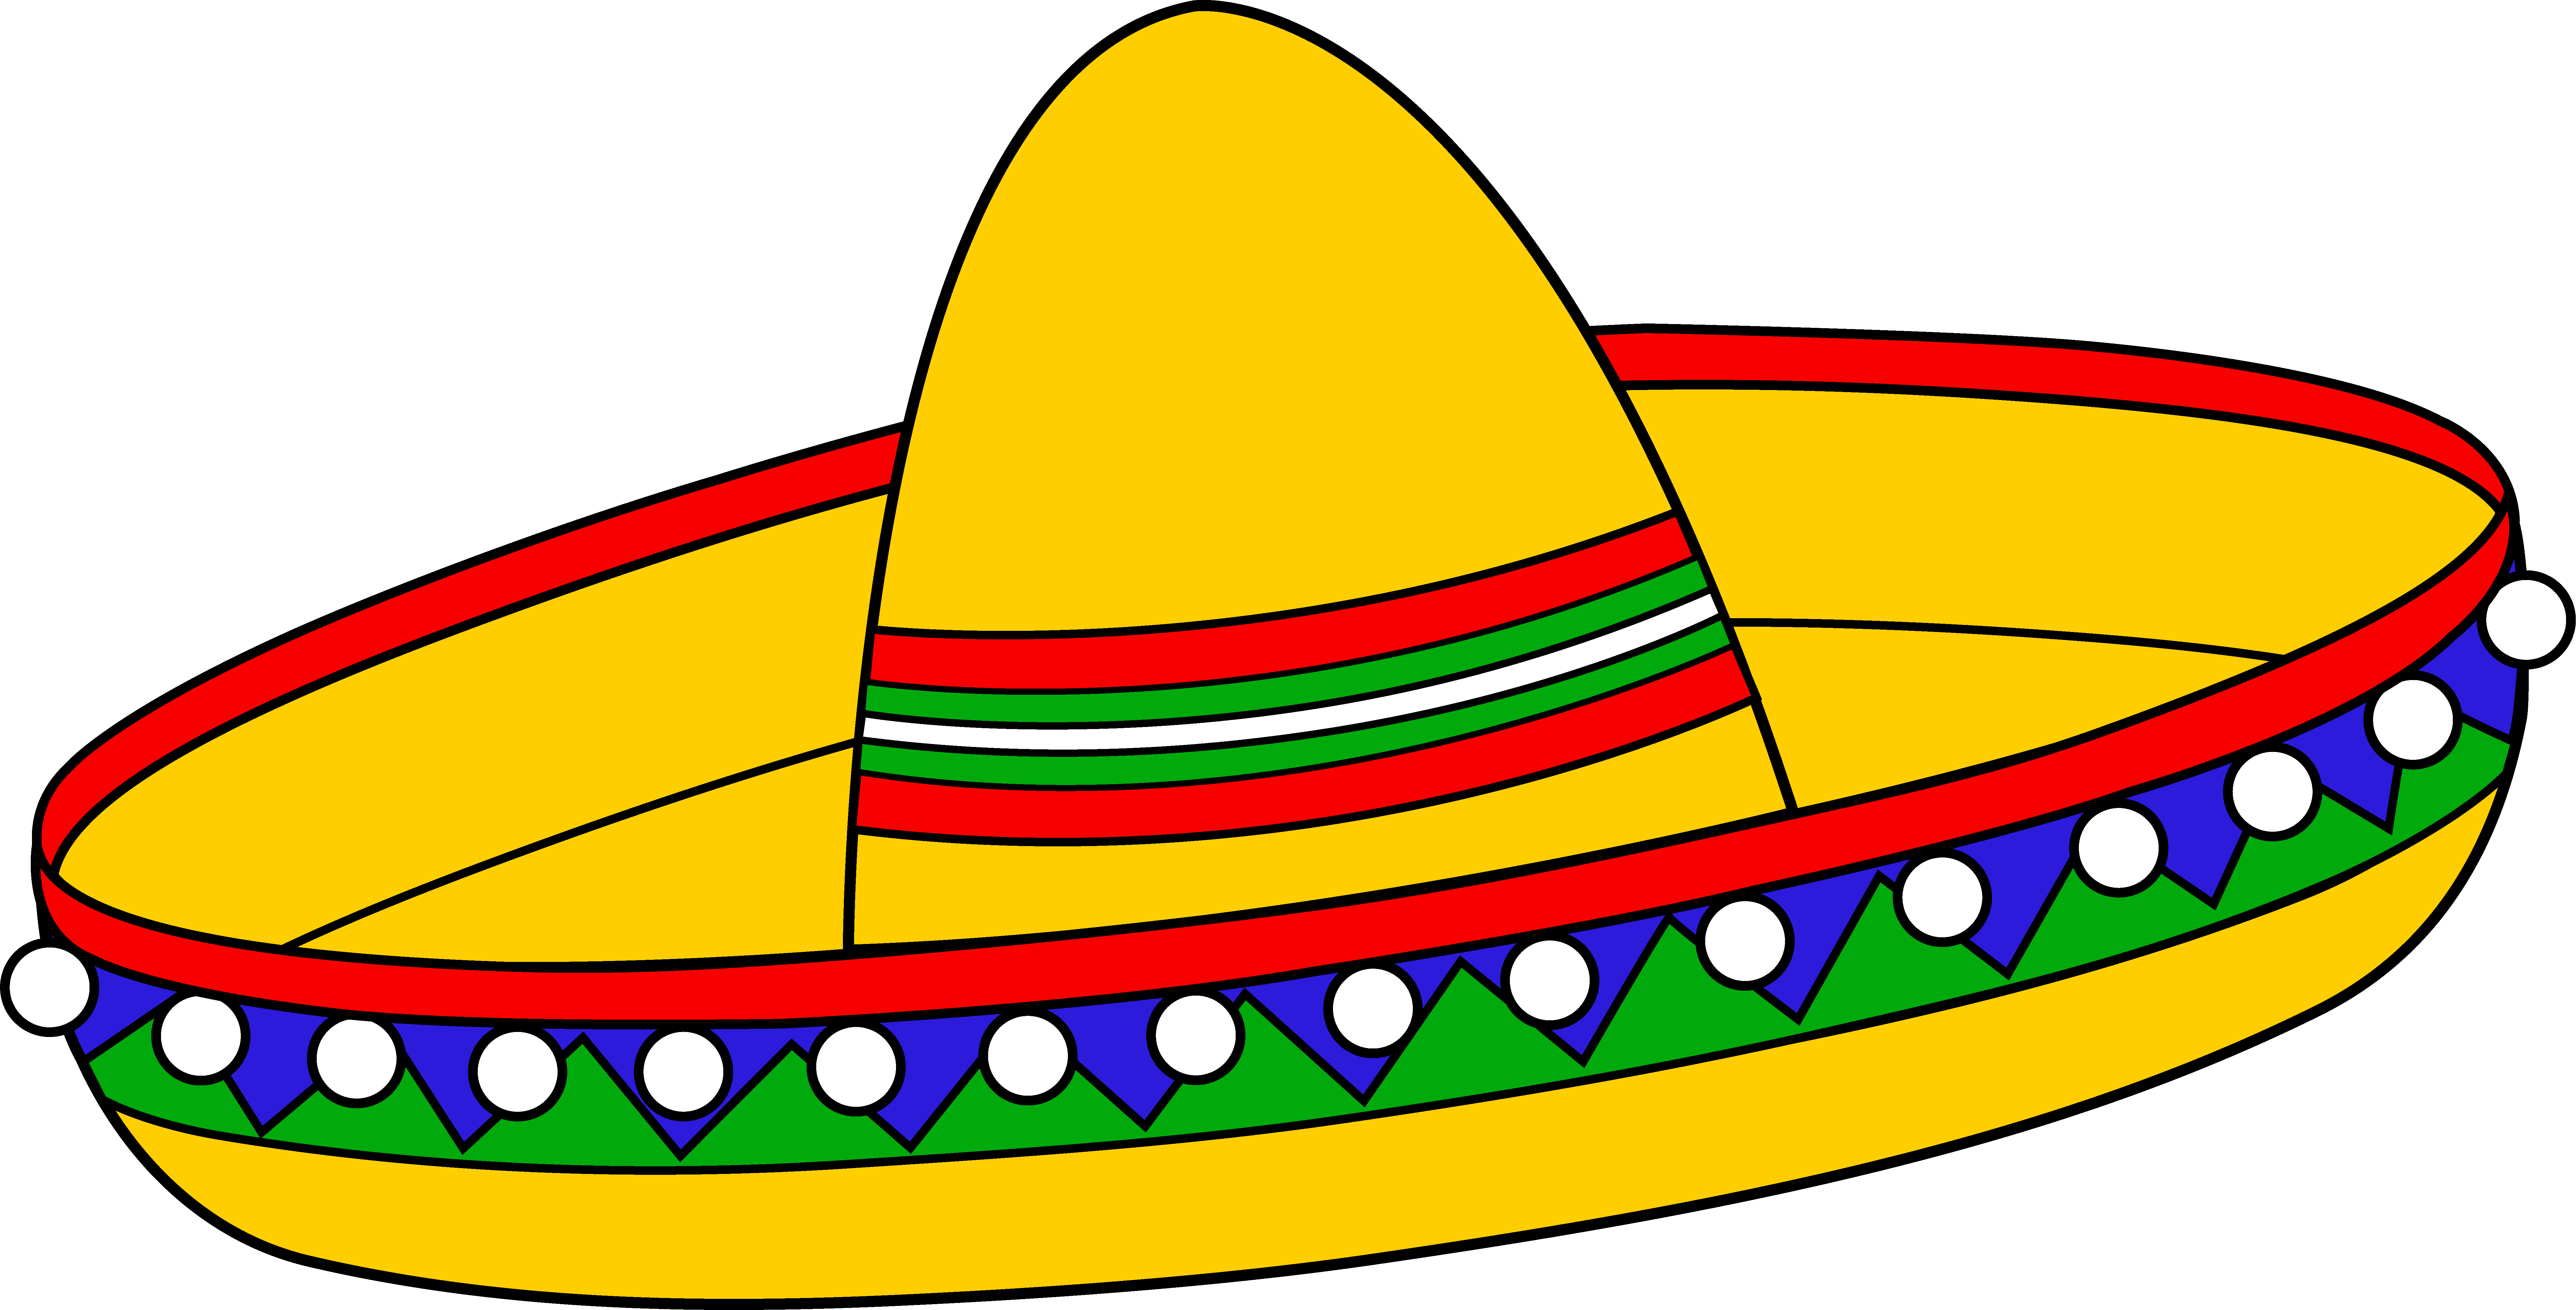 Maracas clipart poncho mexican. Colorful sombrero hat free